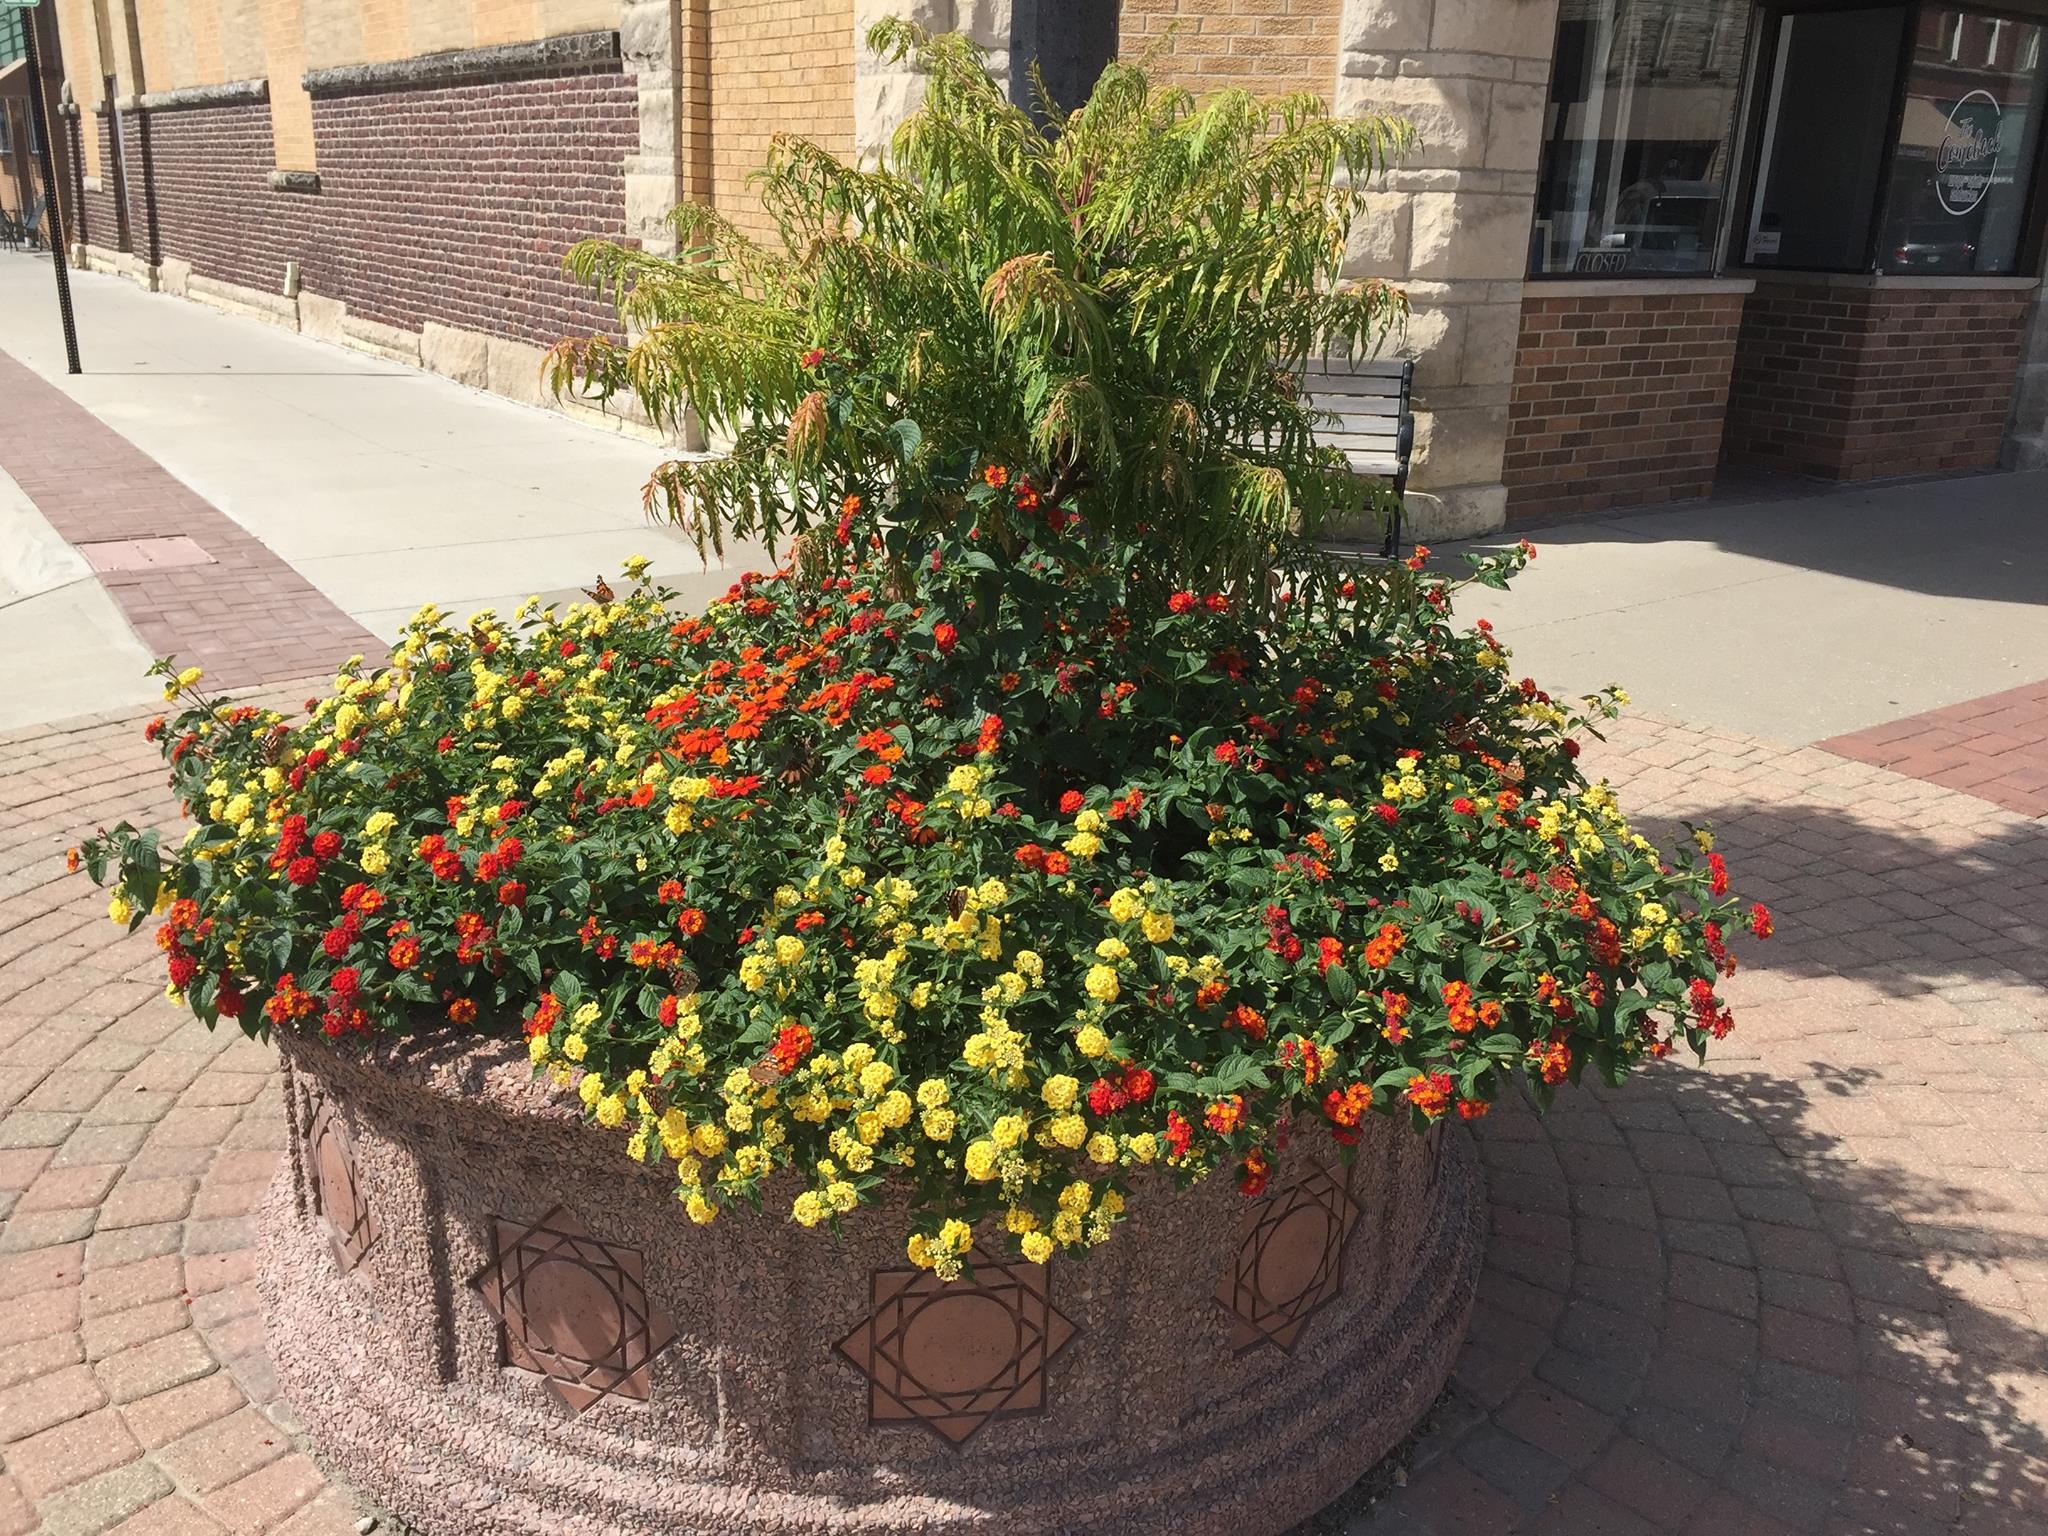 A brick raised bed on a city sidewalk filled with greenery and flowers in bloom